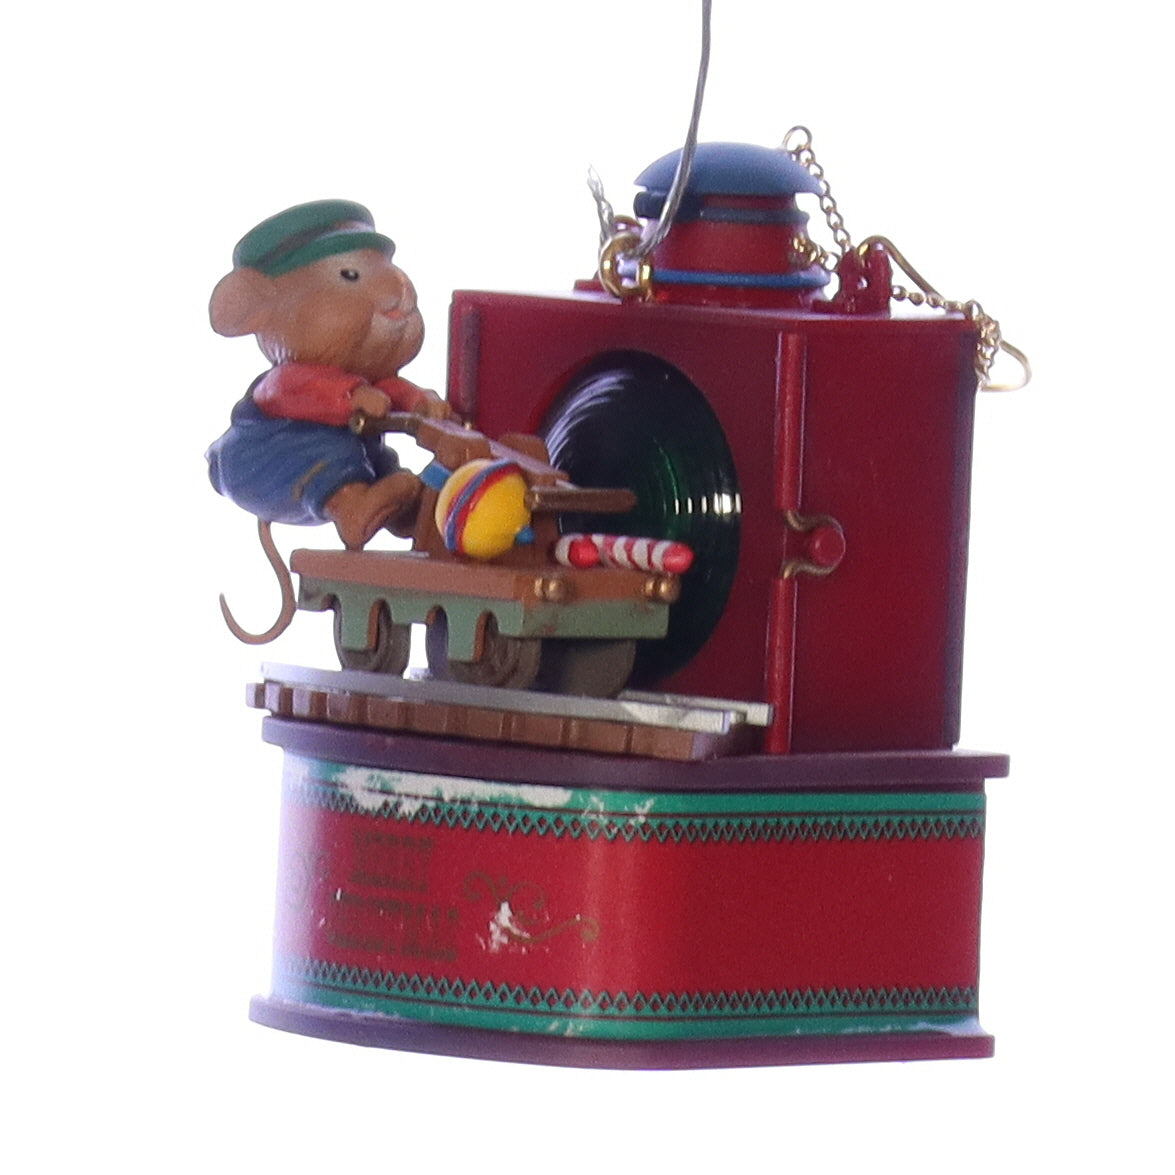 Enesco_Treasury_of_Christmas_Ornaments_58187760_Lighting_the_Way_Christmas_Ornament_1992 Front Left View